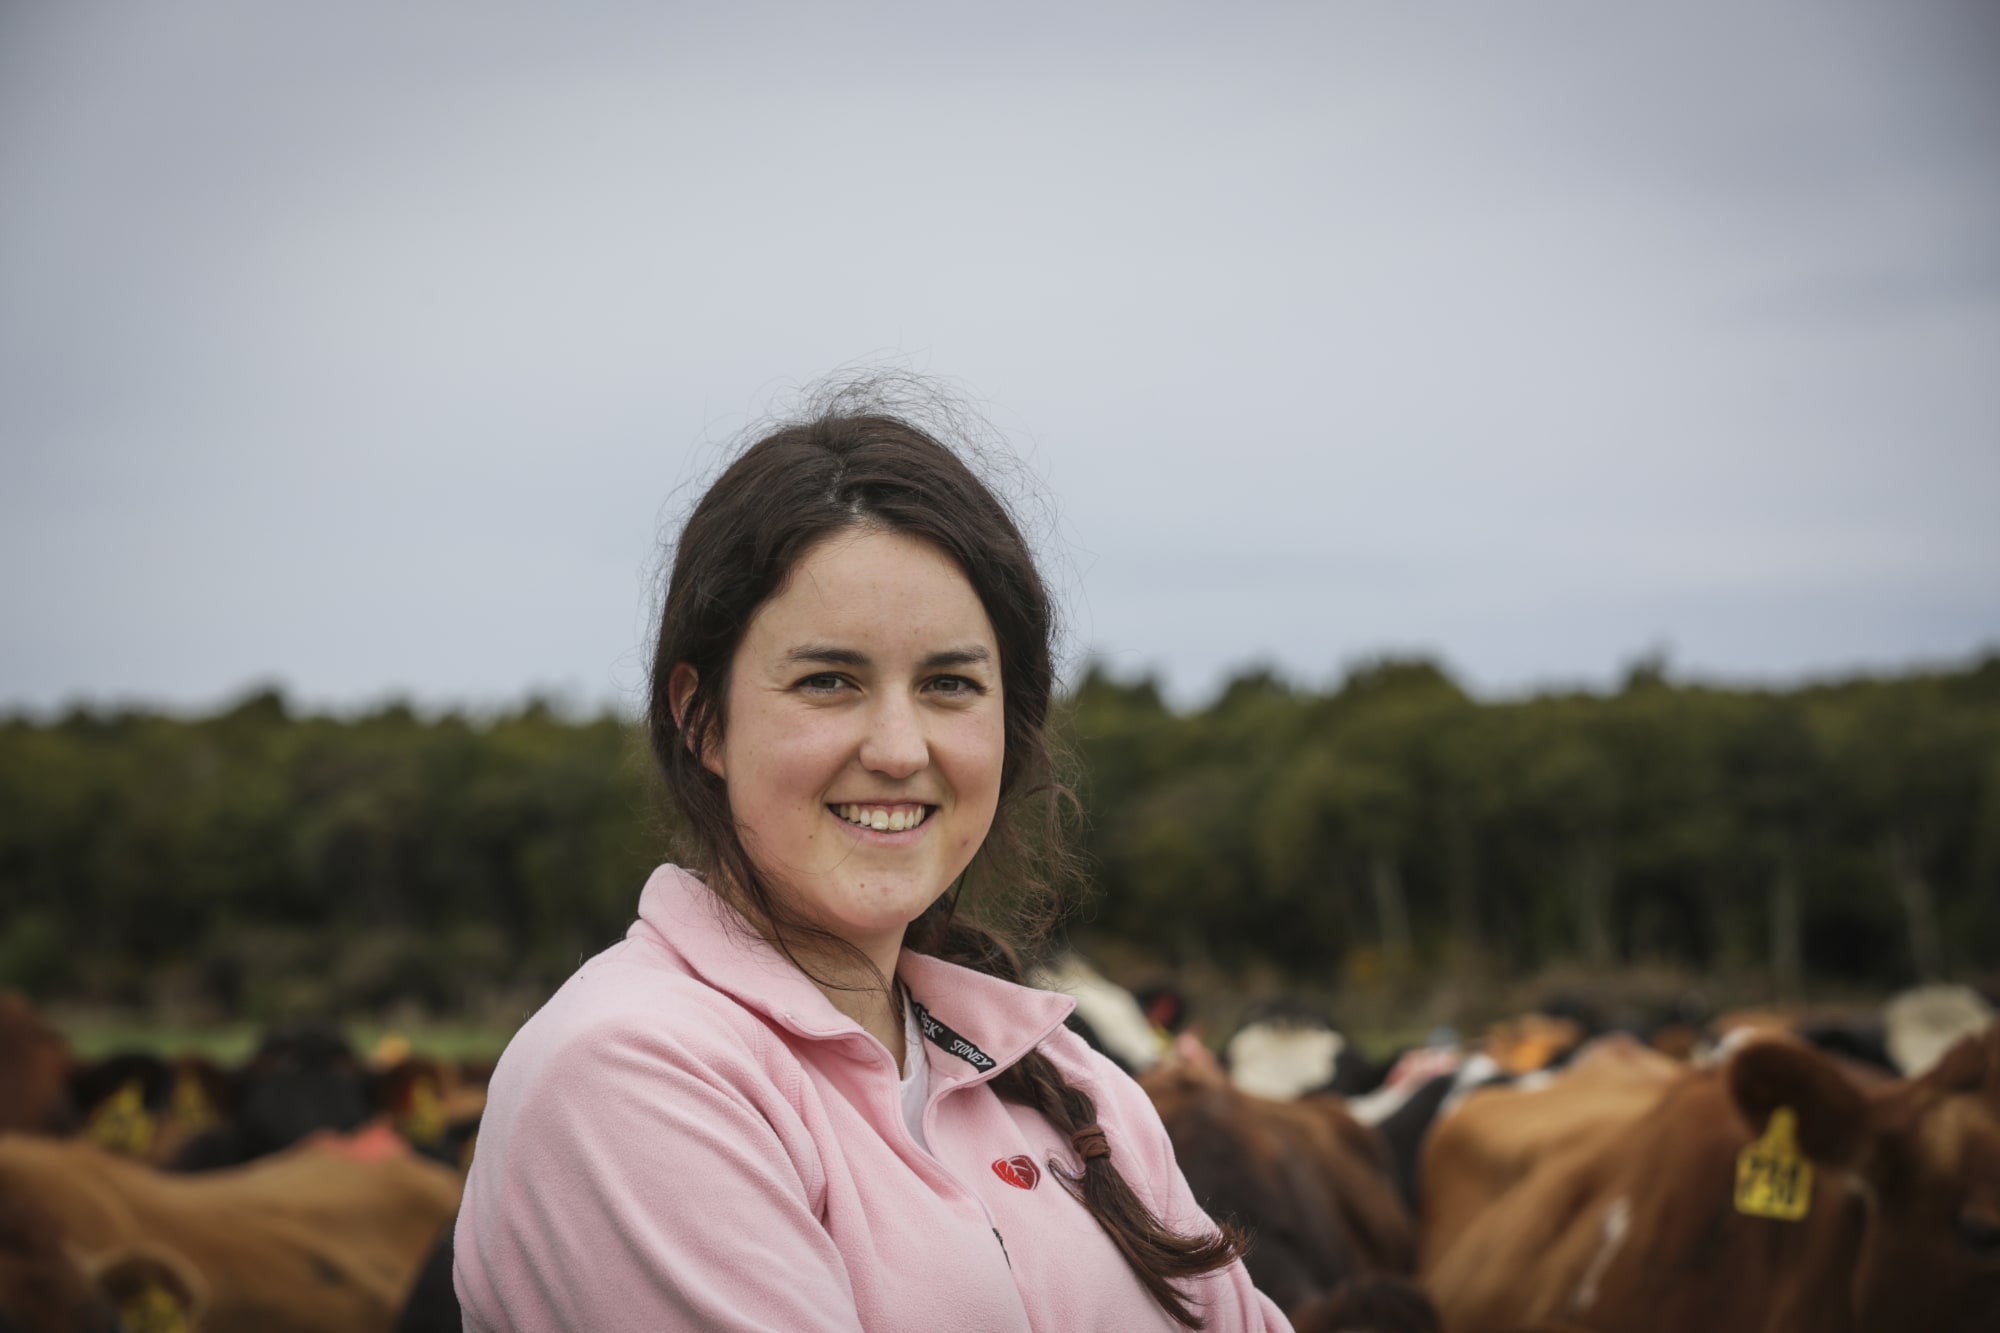 Melissa Mathieson says technologically-savvy younger farmers will adapt to the environmental challenges dairying faces